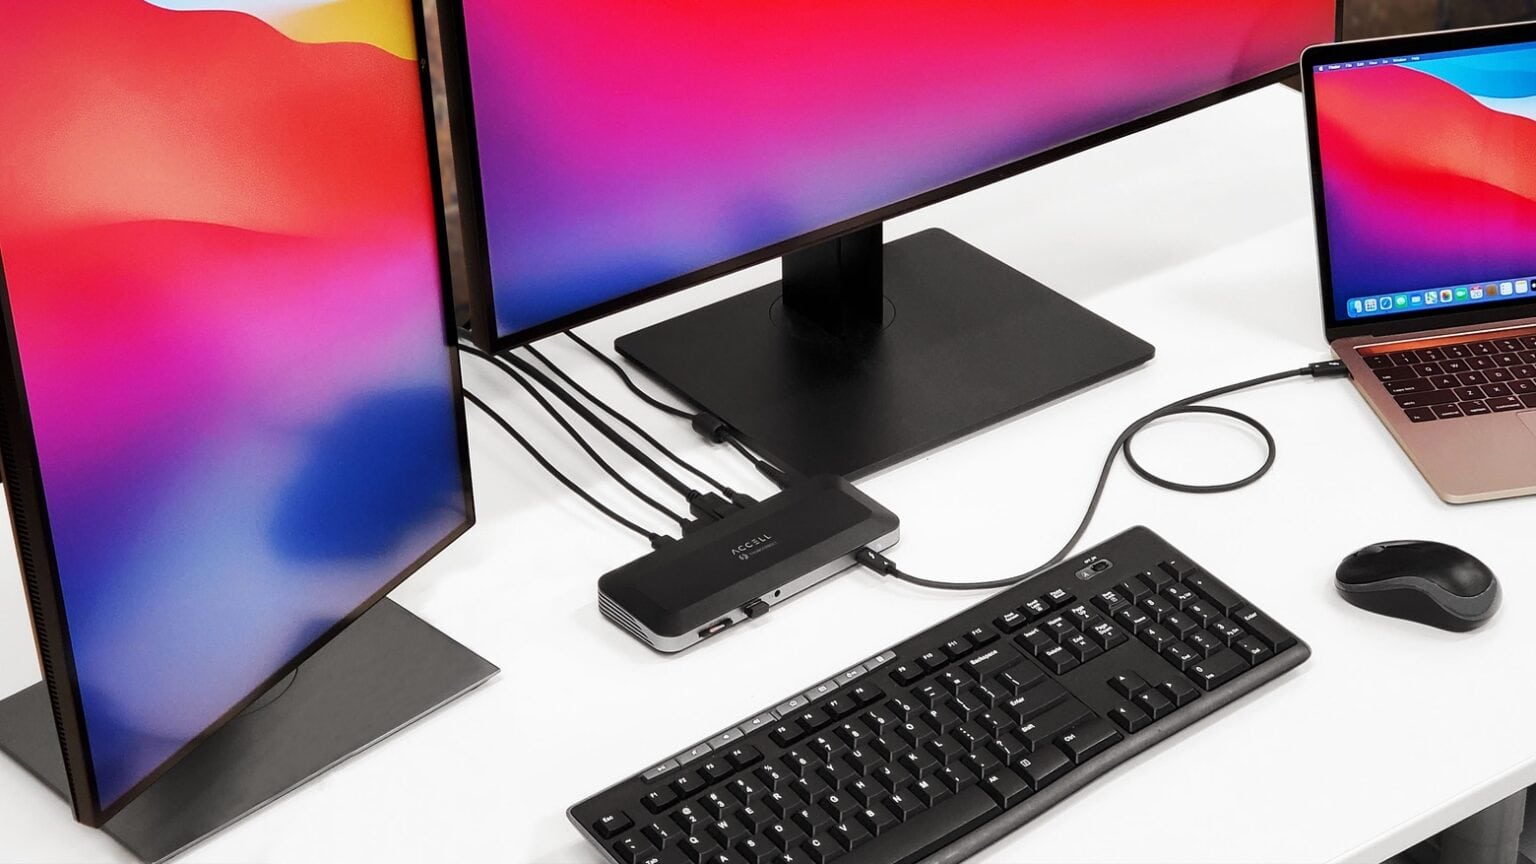 Accell’s new Thunderbolt 4 dock offers high-speed data transfers, plenty of ports